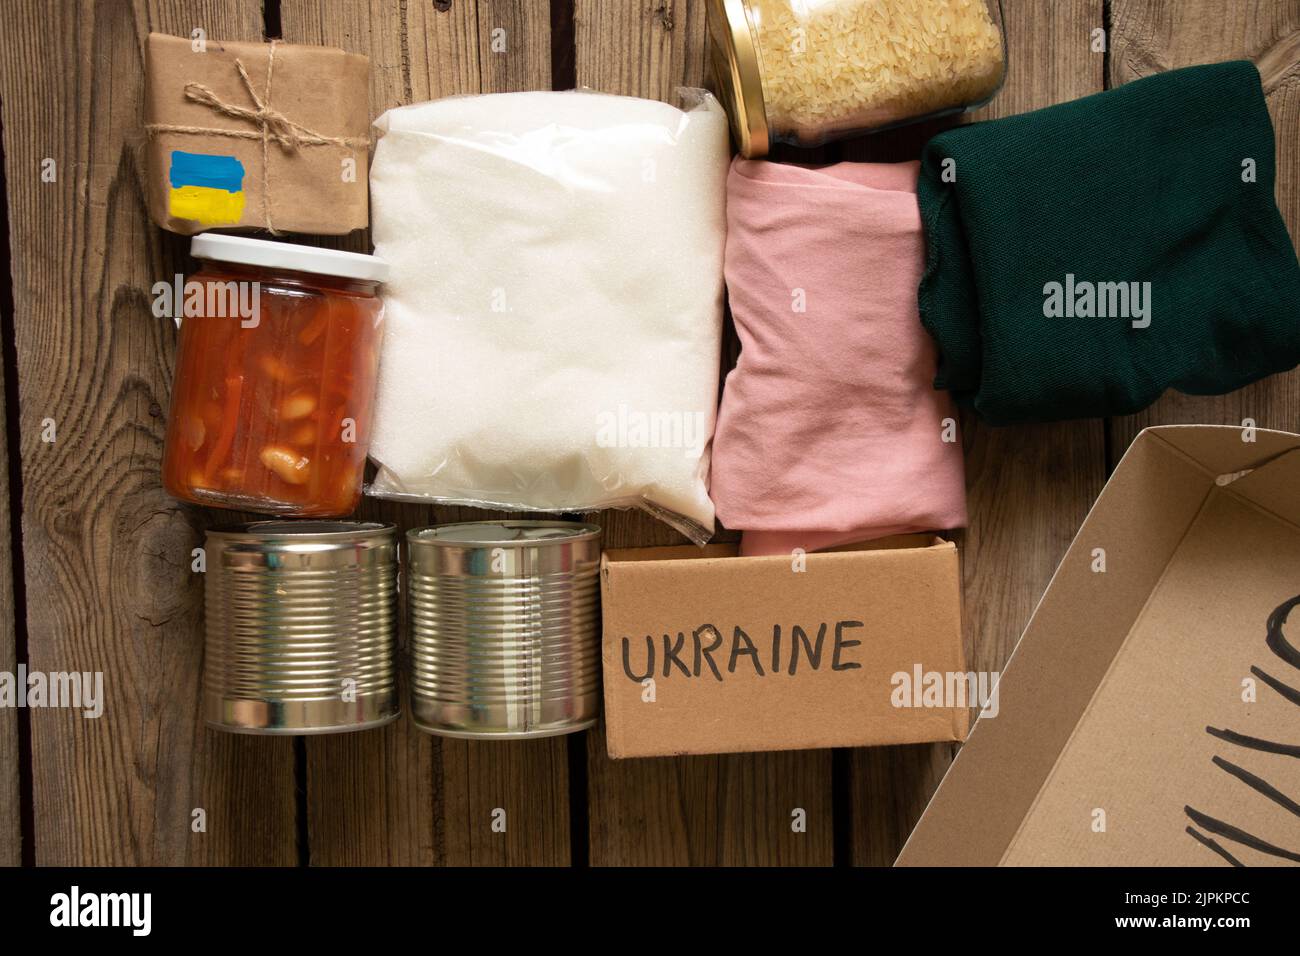 Collecting a humanitarian food kit to help people who suffered during the war at the hands of Russia, stop the war in Ukraine, humanitarian aid 2022 Stock Photo